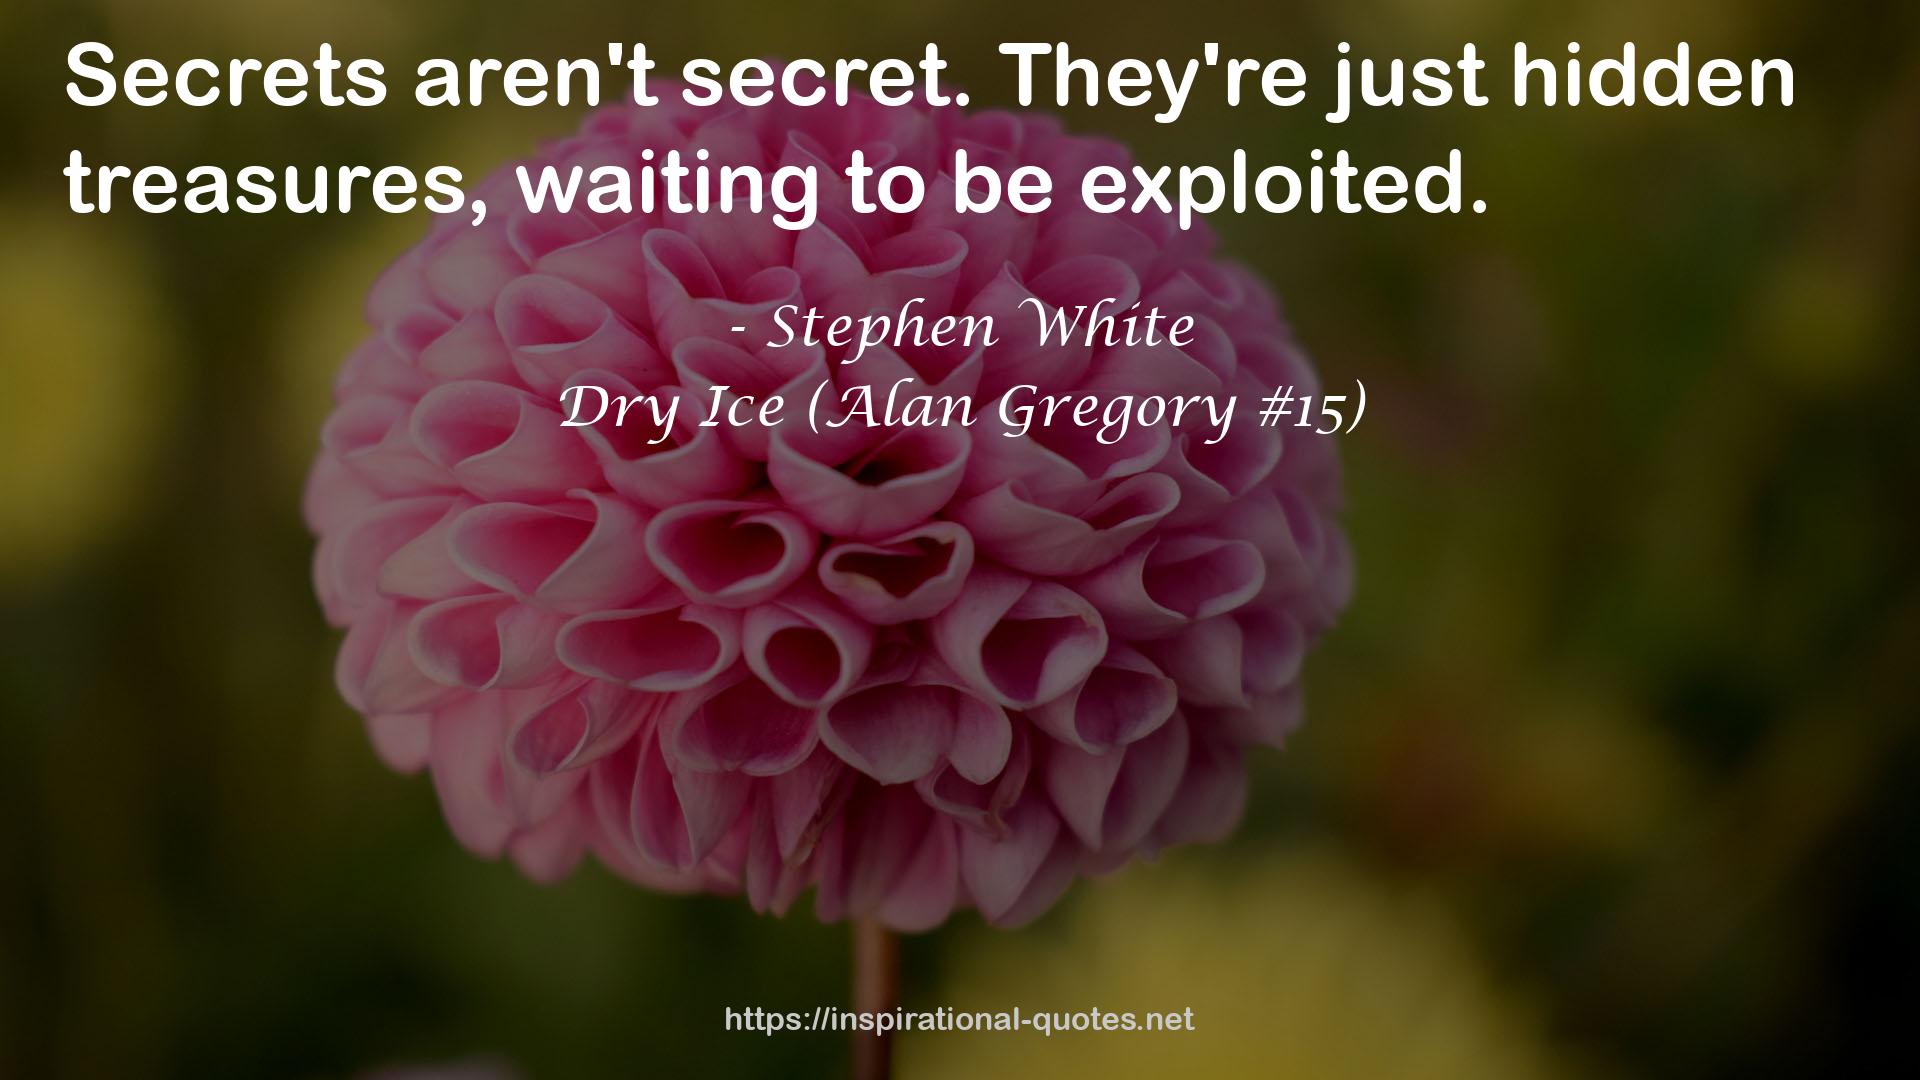 Dry Ice (Alan Gregory #15) QUOTES